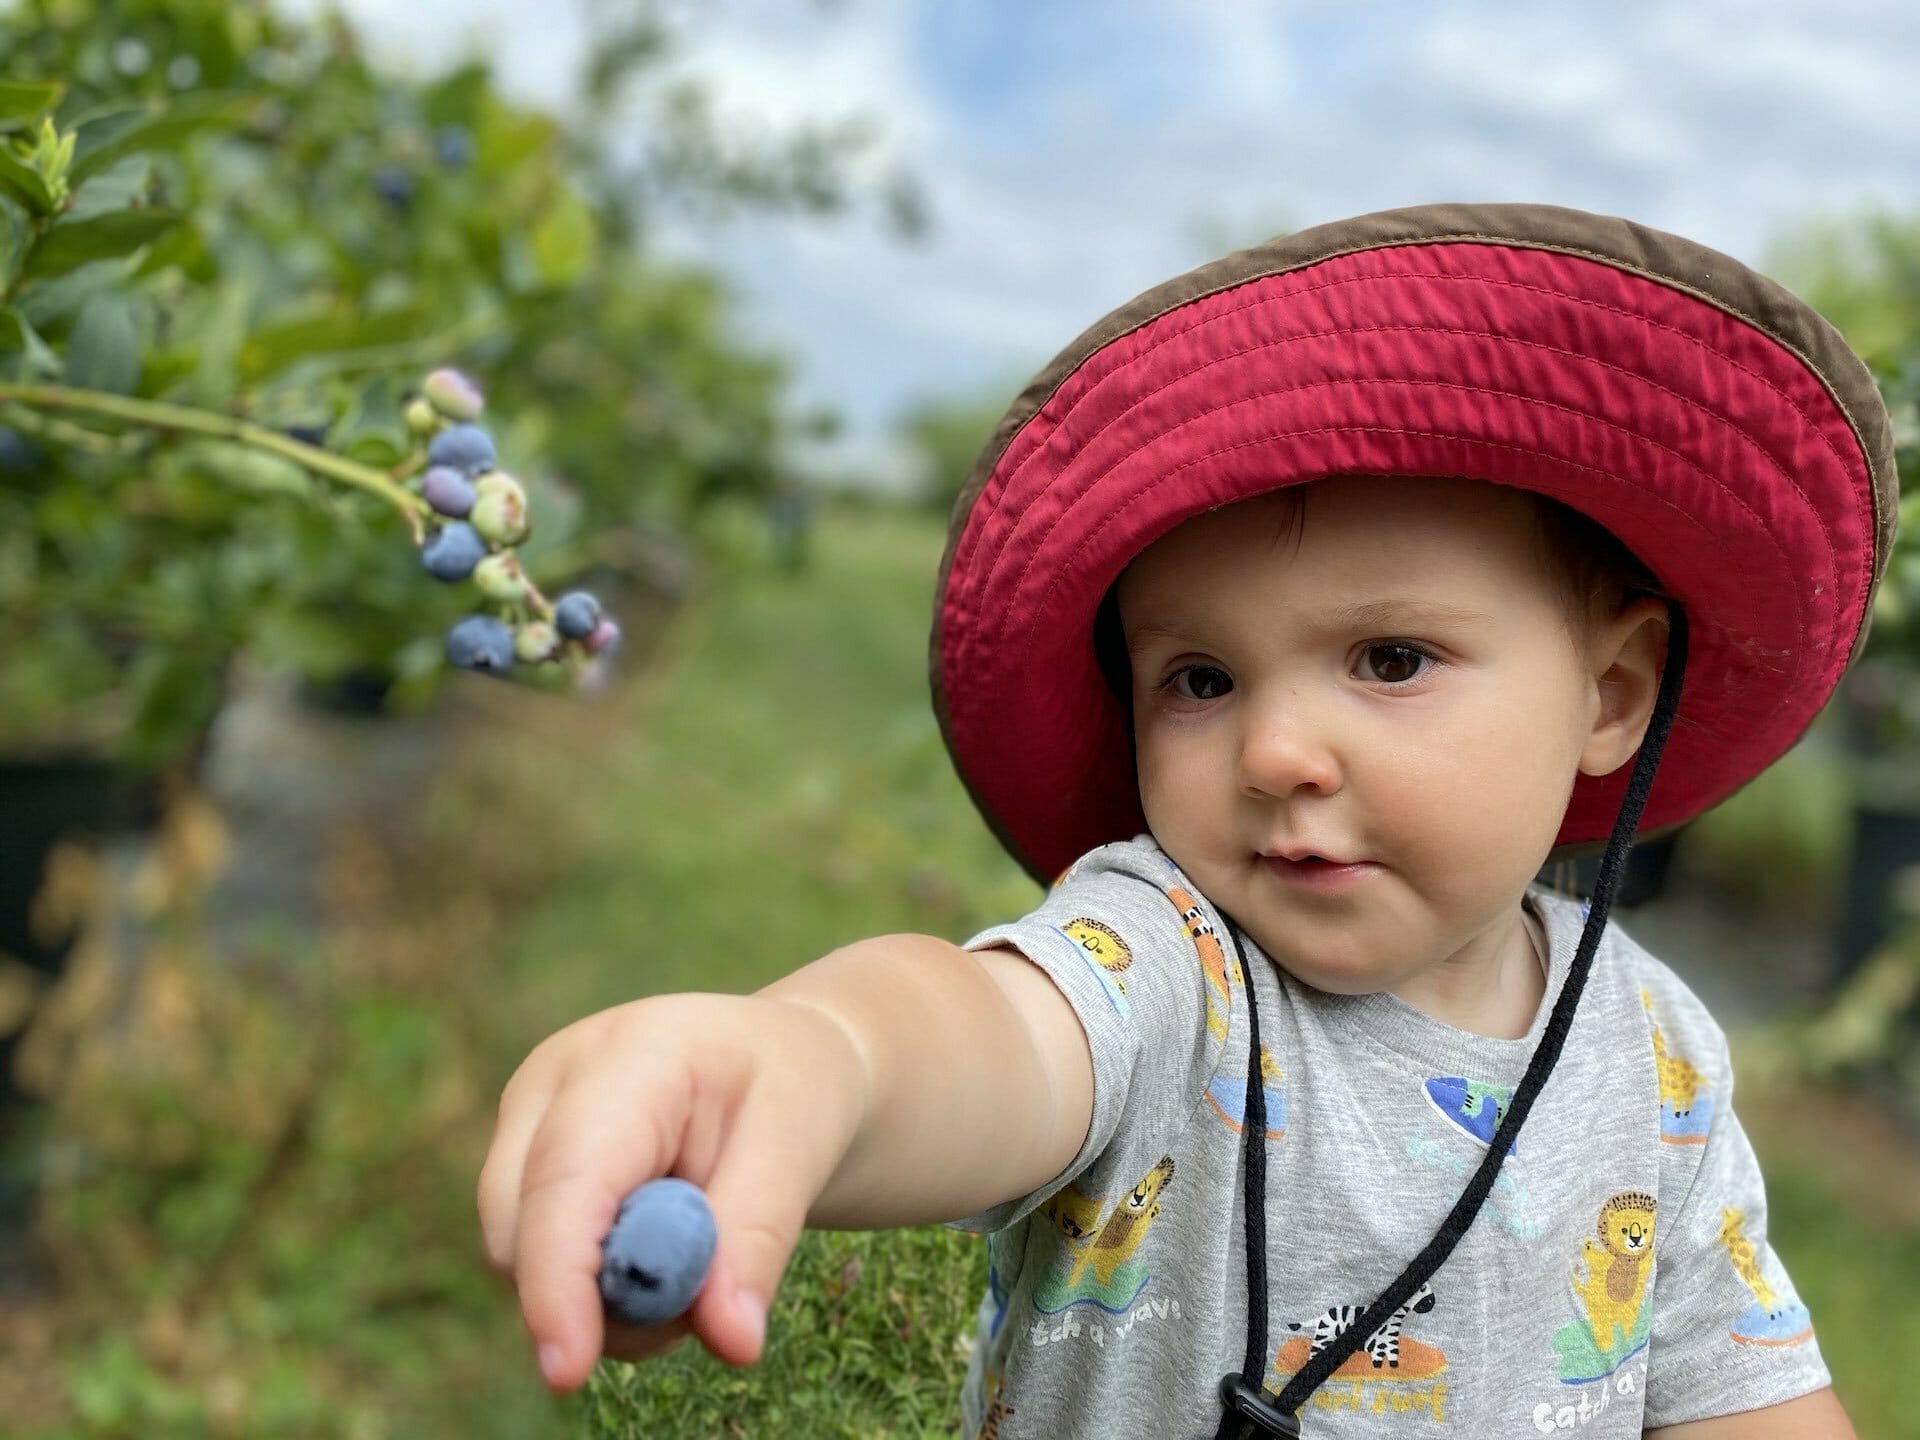 How To Travel Tasmania With Your Adventure Family - Sarah Tayler, Blueberries, Child, Family, Foraging, Food